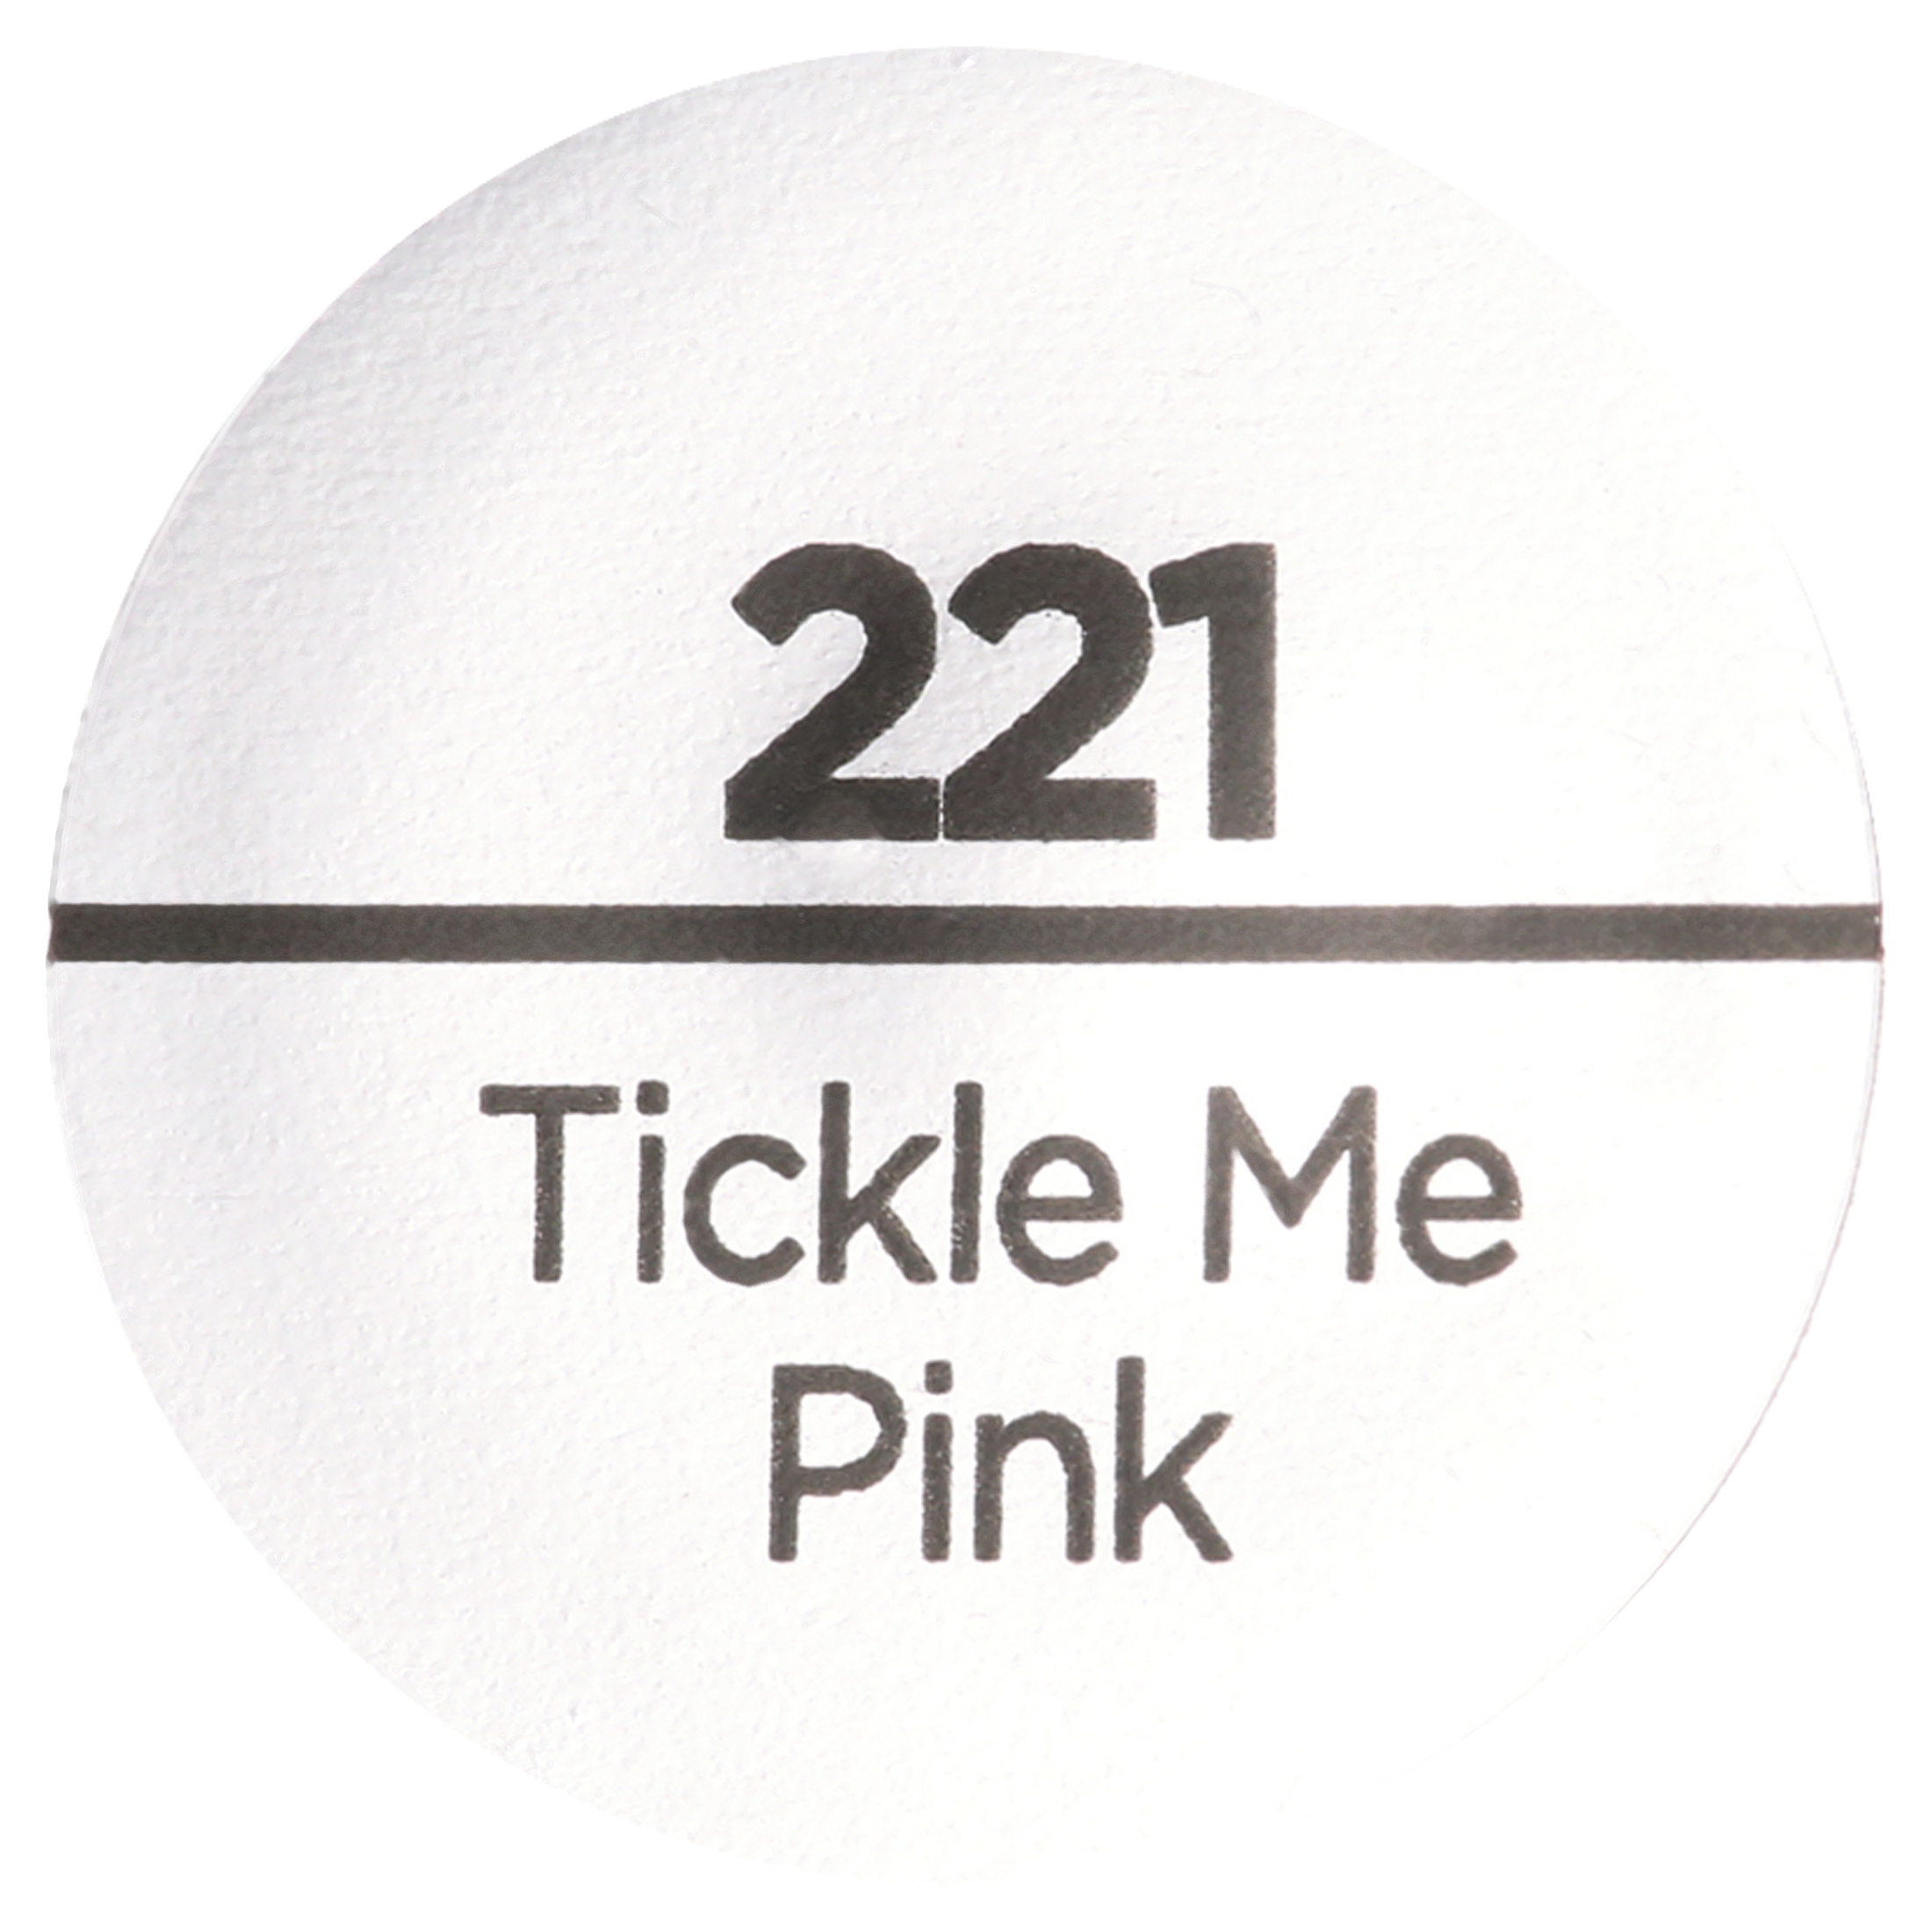 Sally Hansen Complete Salon Manicure Nail Color, Tickle Me Pink - image 14 of 15